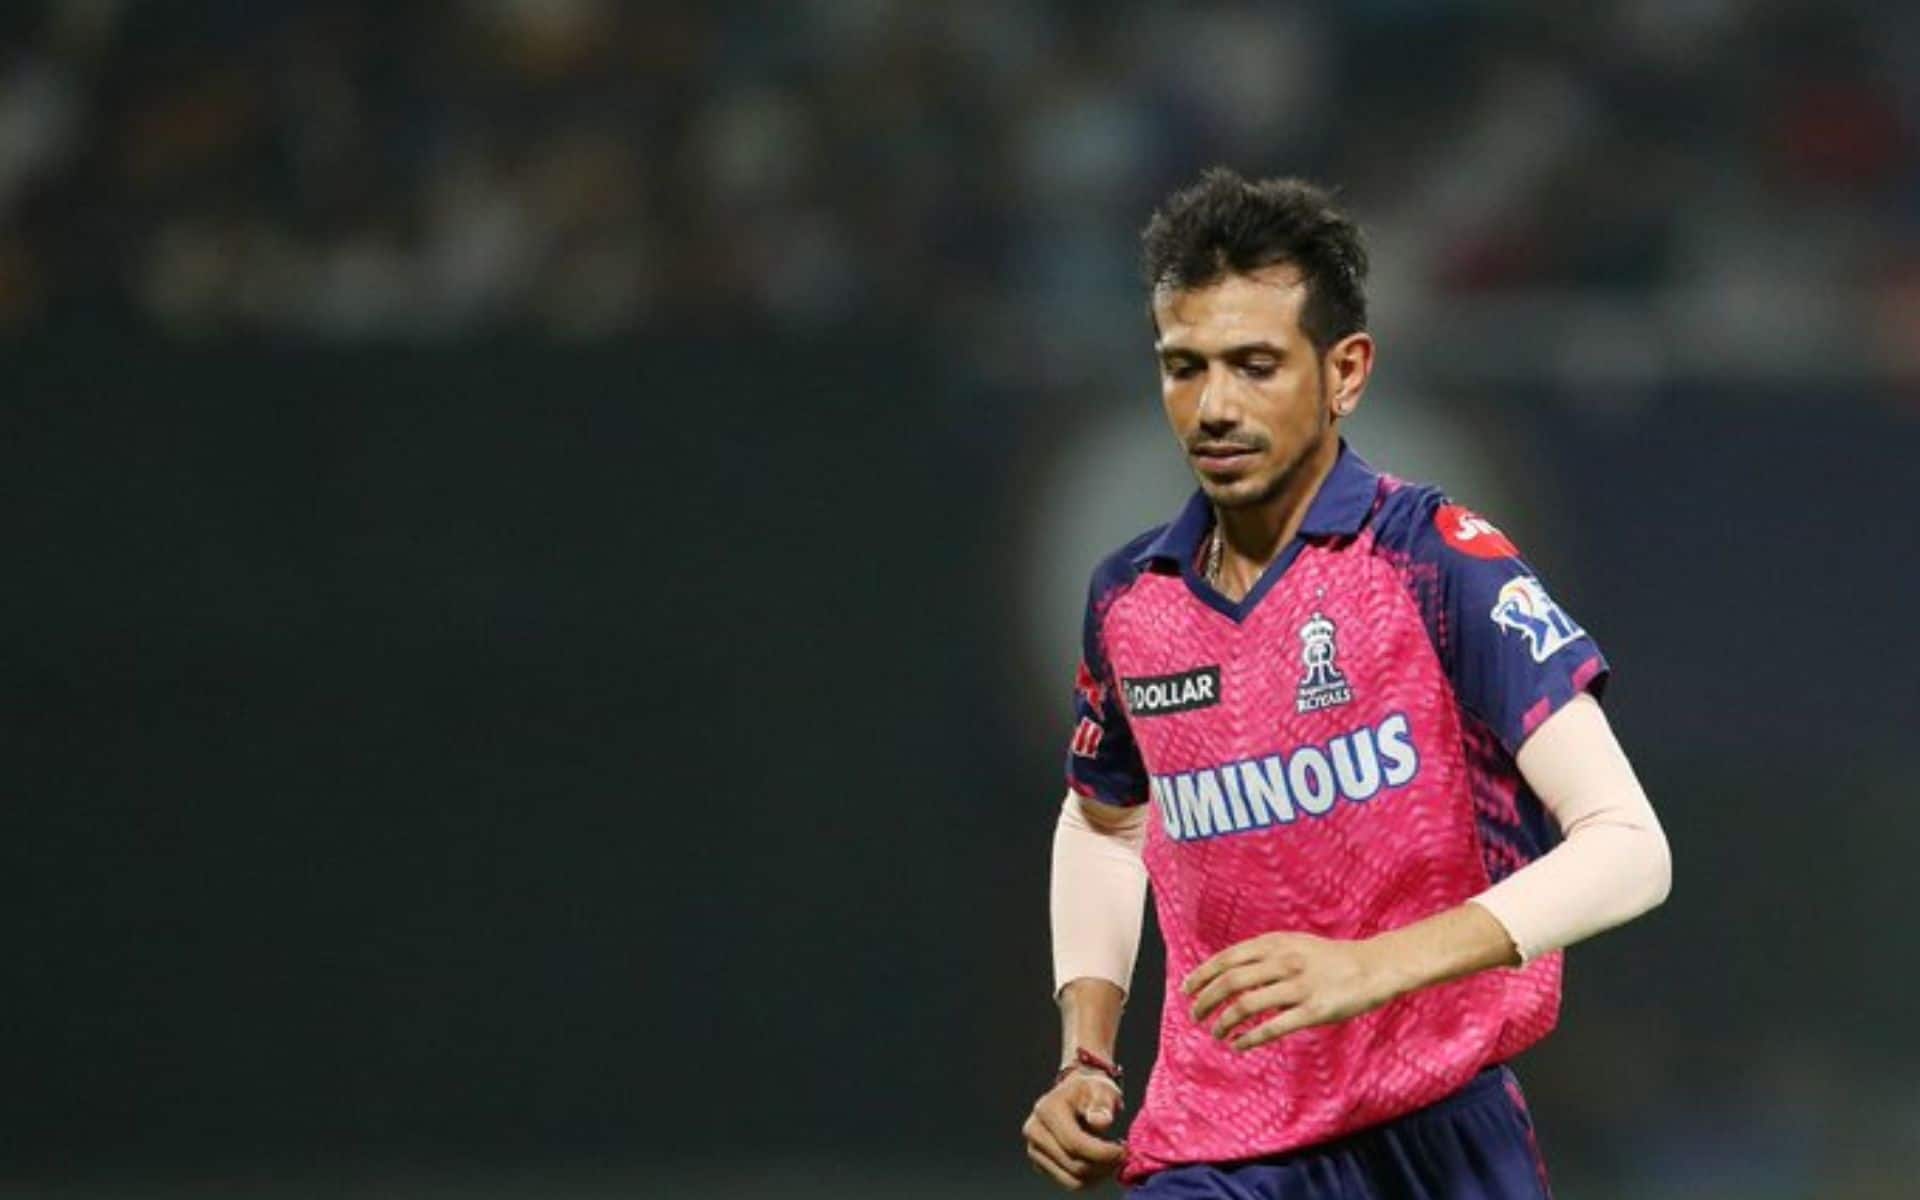 Chahal recently conceded his 200th six in his IPL career (X.com)